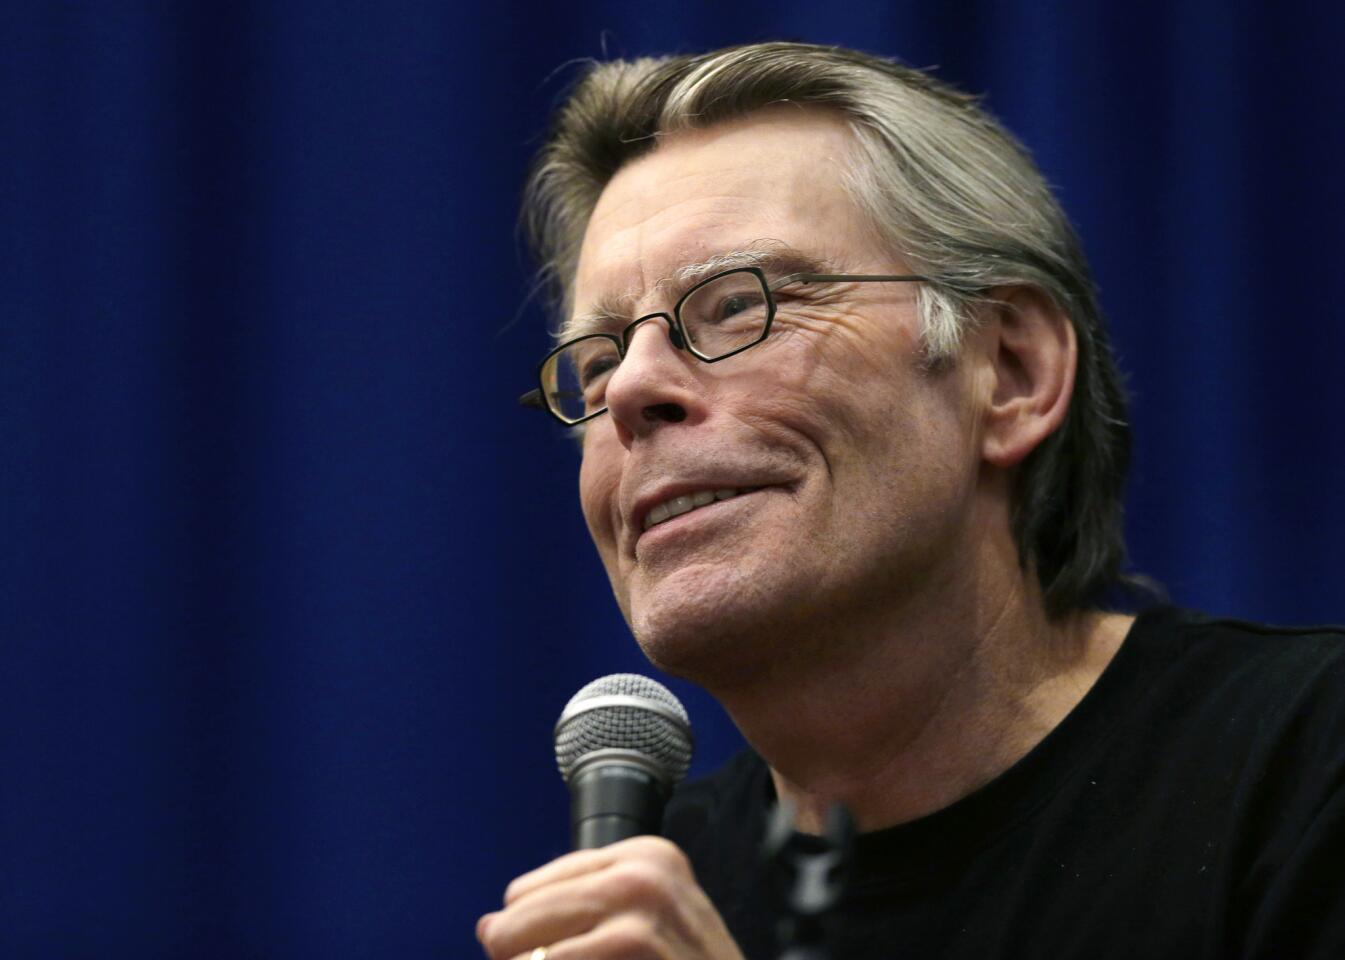 Bestelling novelist Stephen King signed the open letter to Amazon. His books, including the upcoming novel "Revival," are published by Scribner (an imprint of Simon & Schuster, not Hachette).